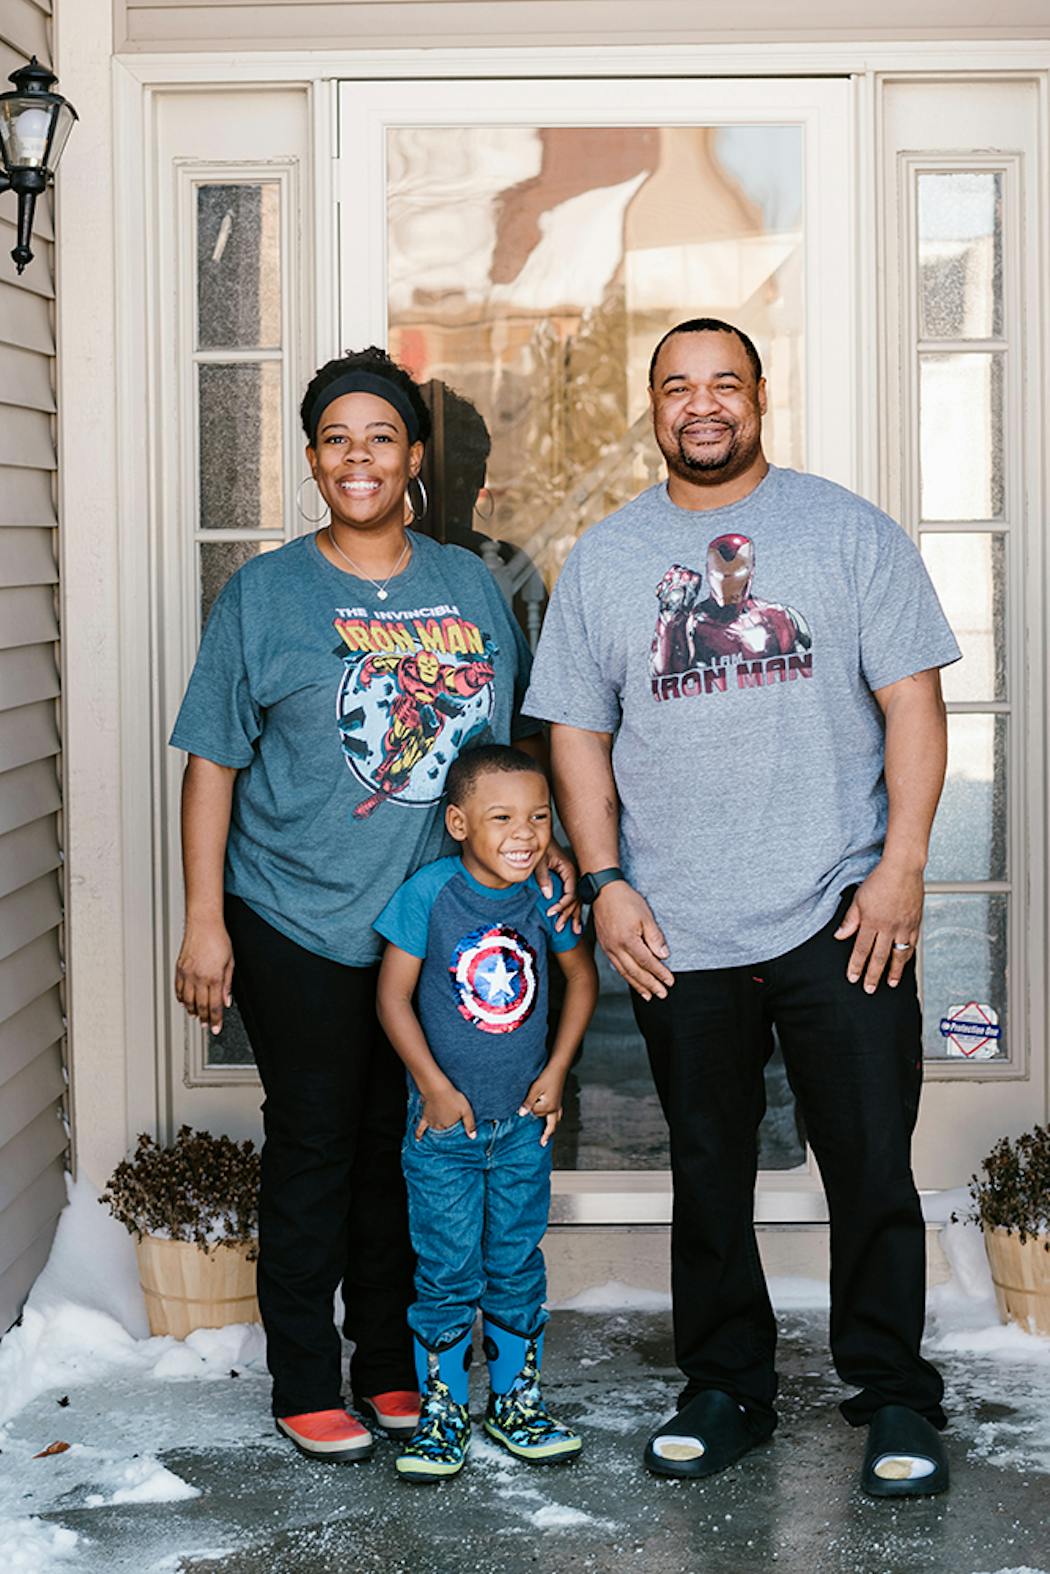 Rineeka and Steven Sheppard, who added a concession stand to their basement theater, outside their home with their son, Tristan, in Indianapolis.